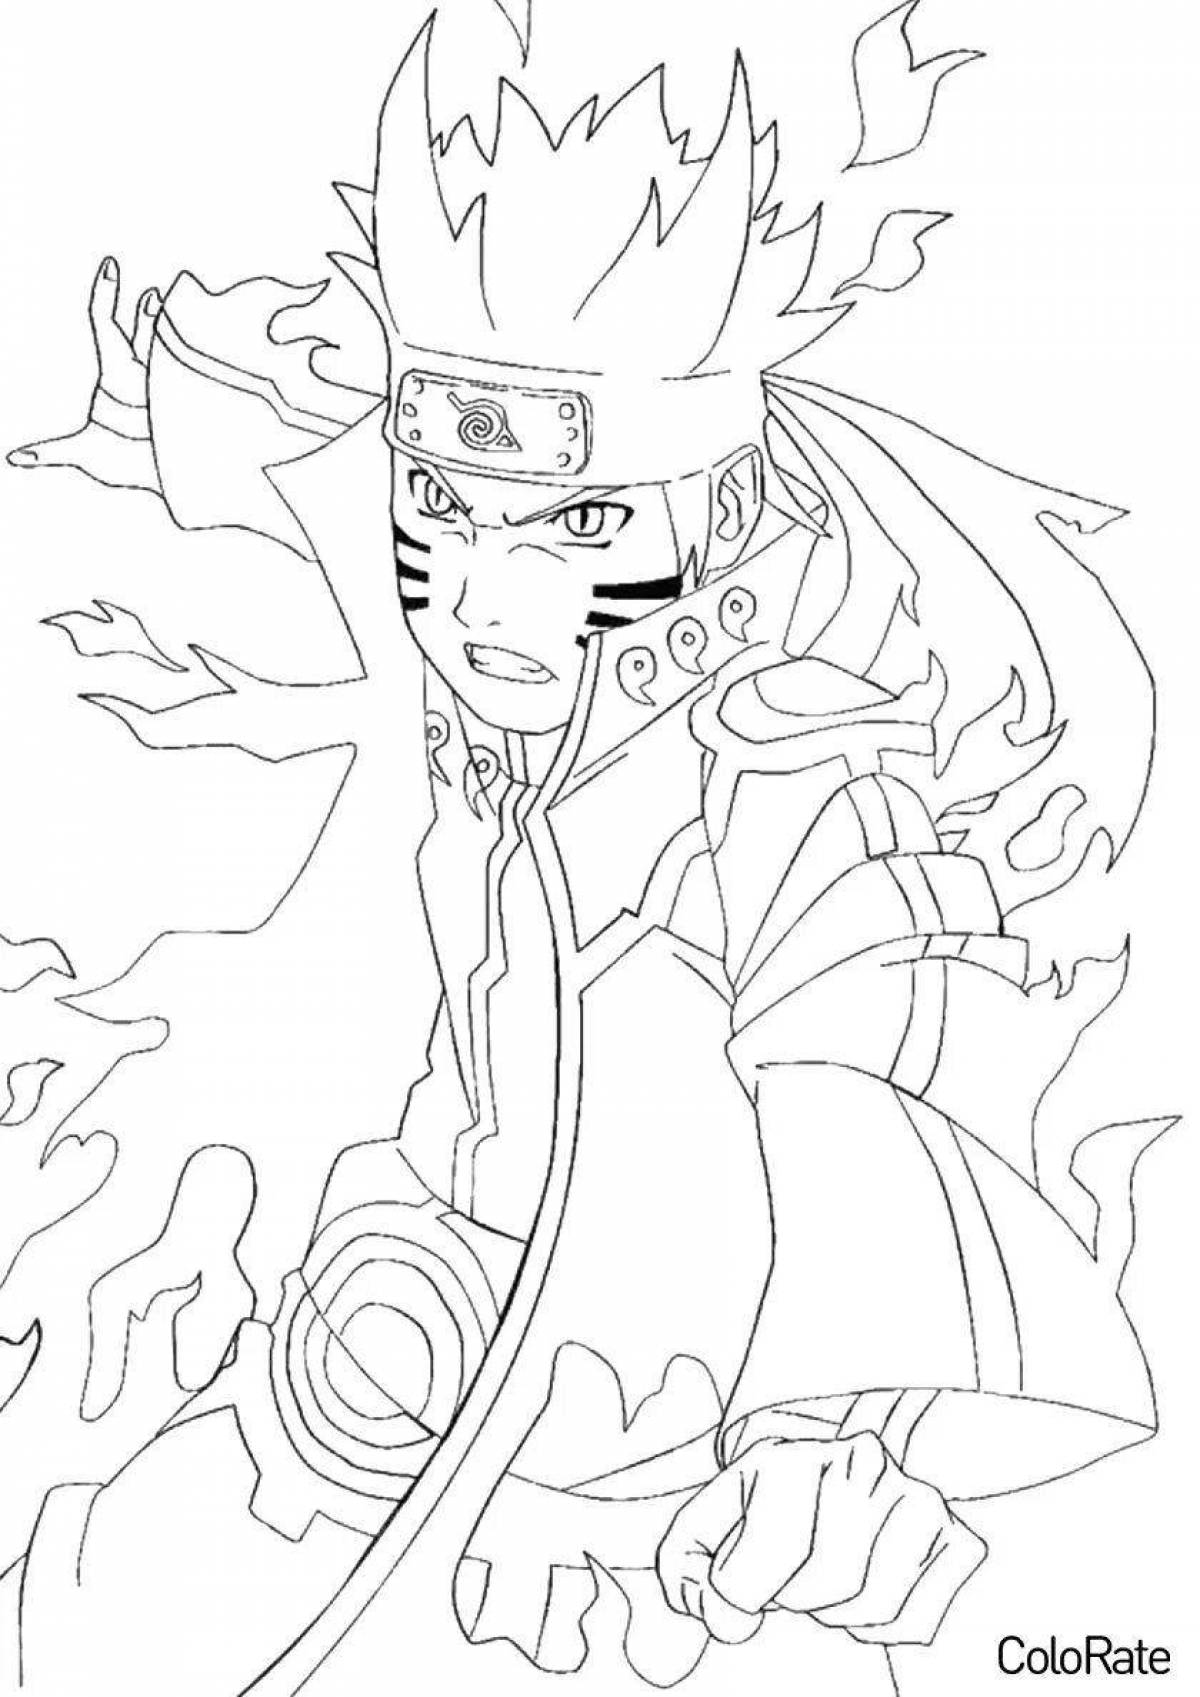 Marvelous complex anime naruto coloring page